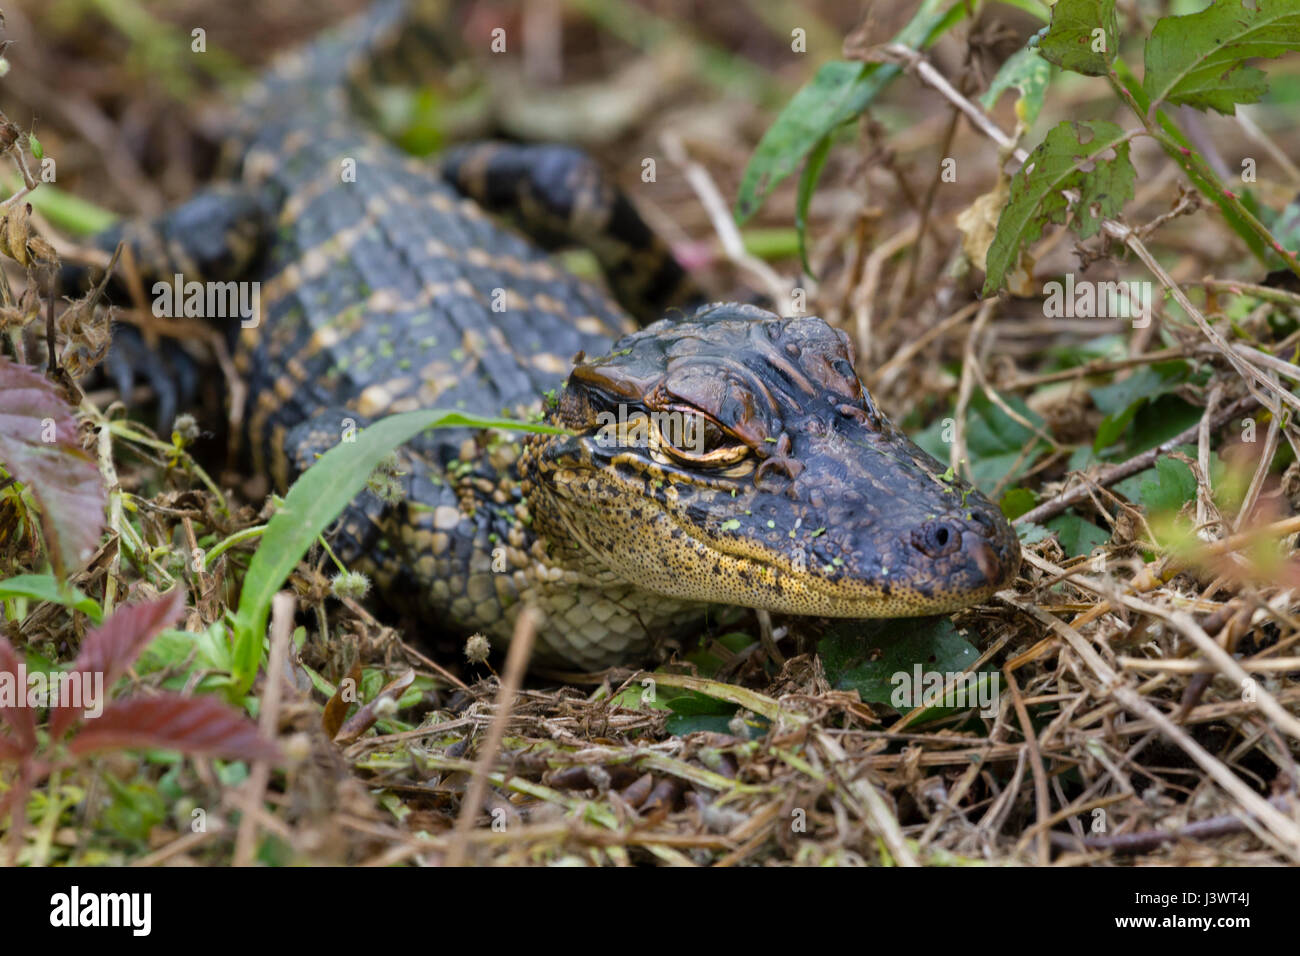 Baby american alligator at Brazos Bend State Park Stock Photo